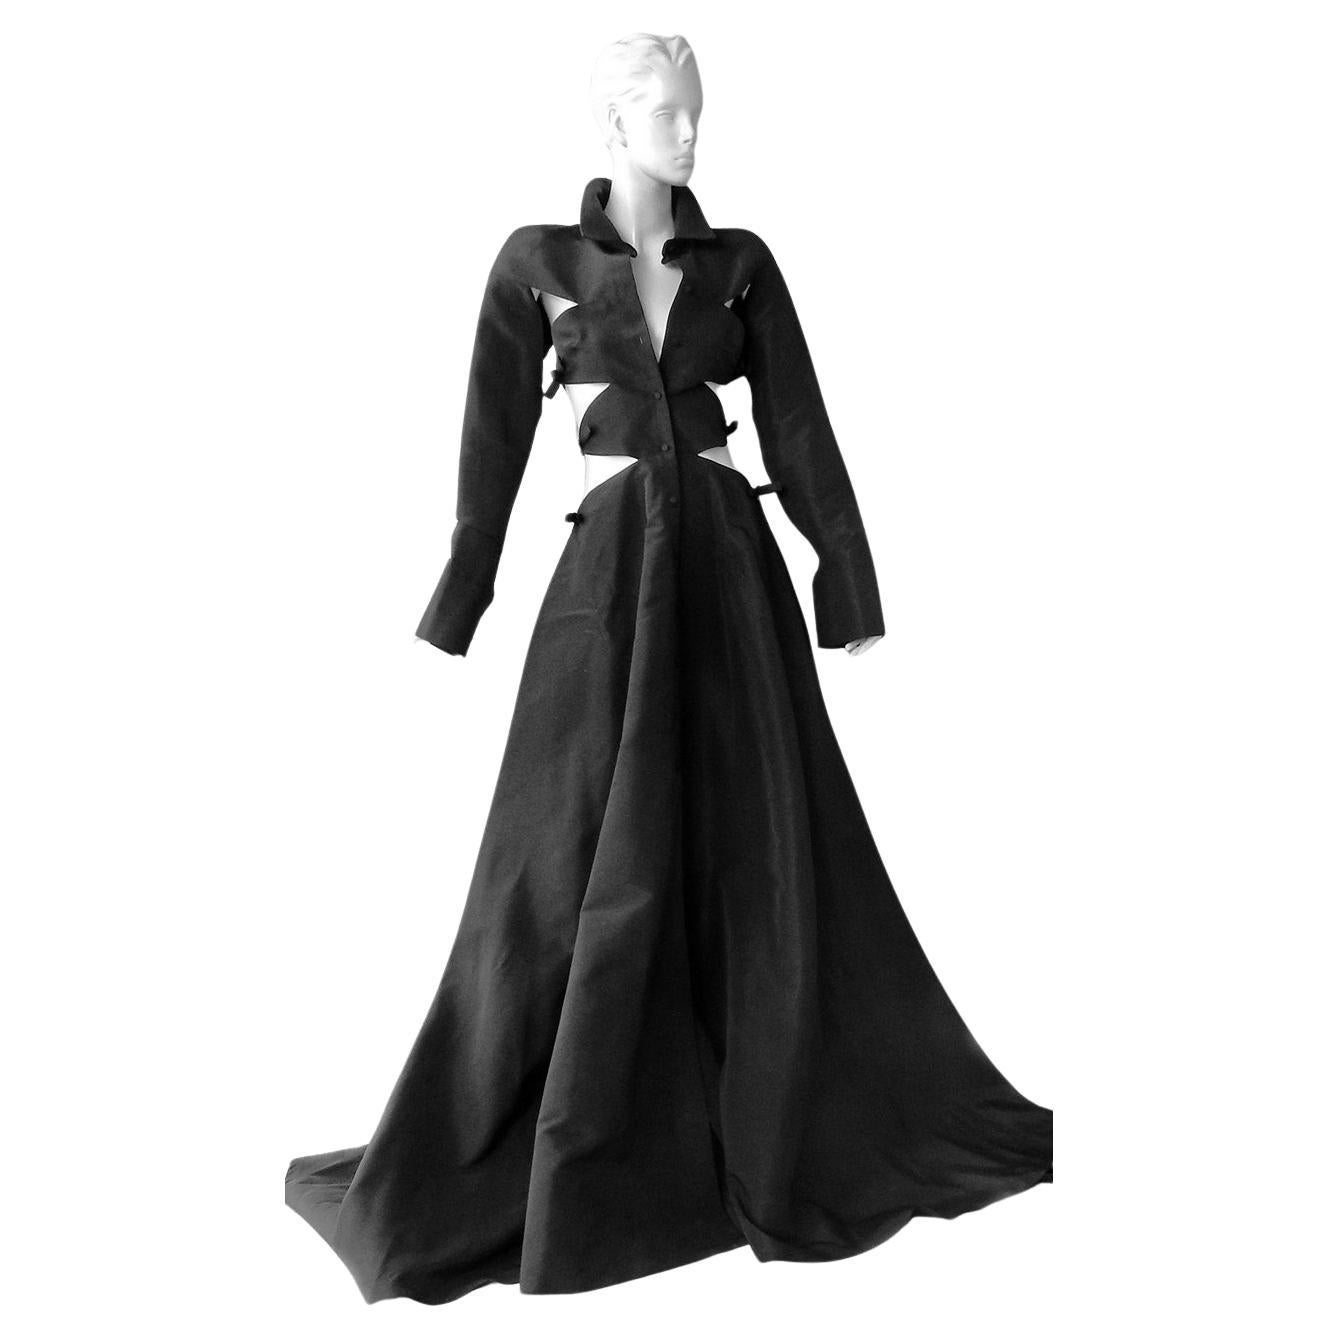 NWT Valentino Runway Black Cutout Coat Dress Gown For Sale